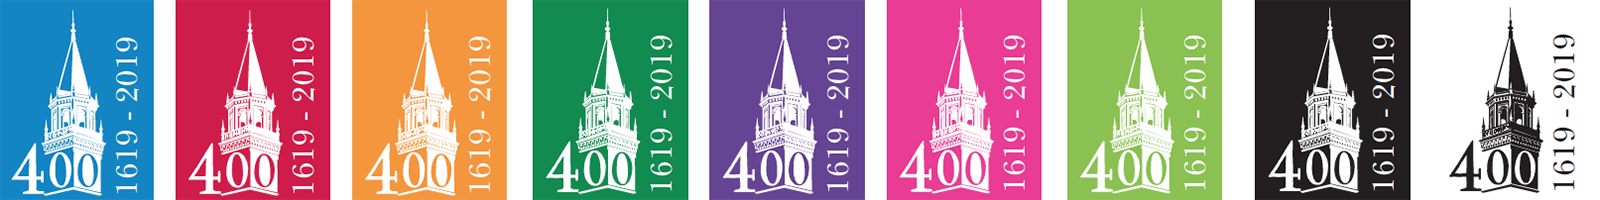 Dulwich College 400 years stamps